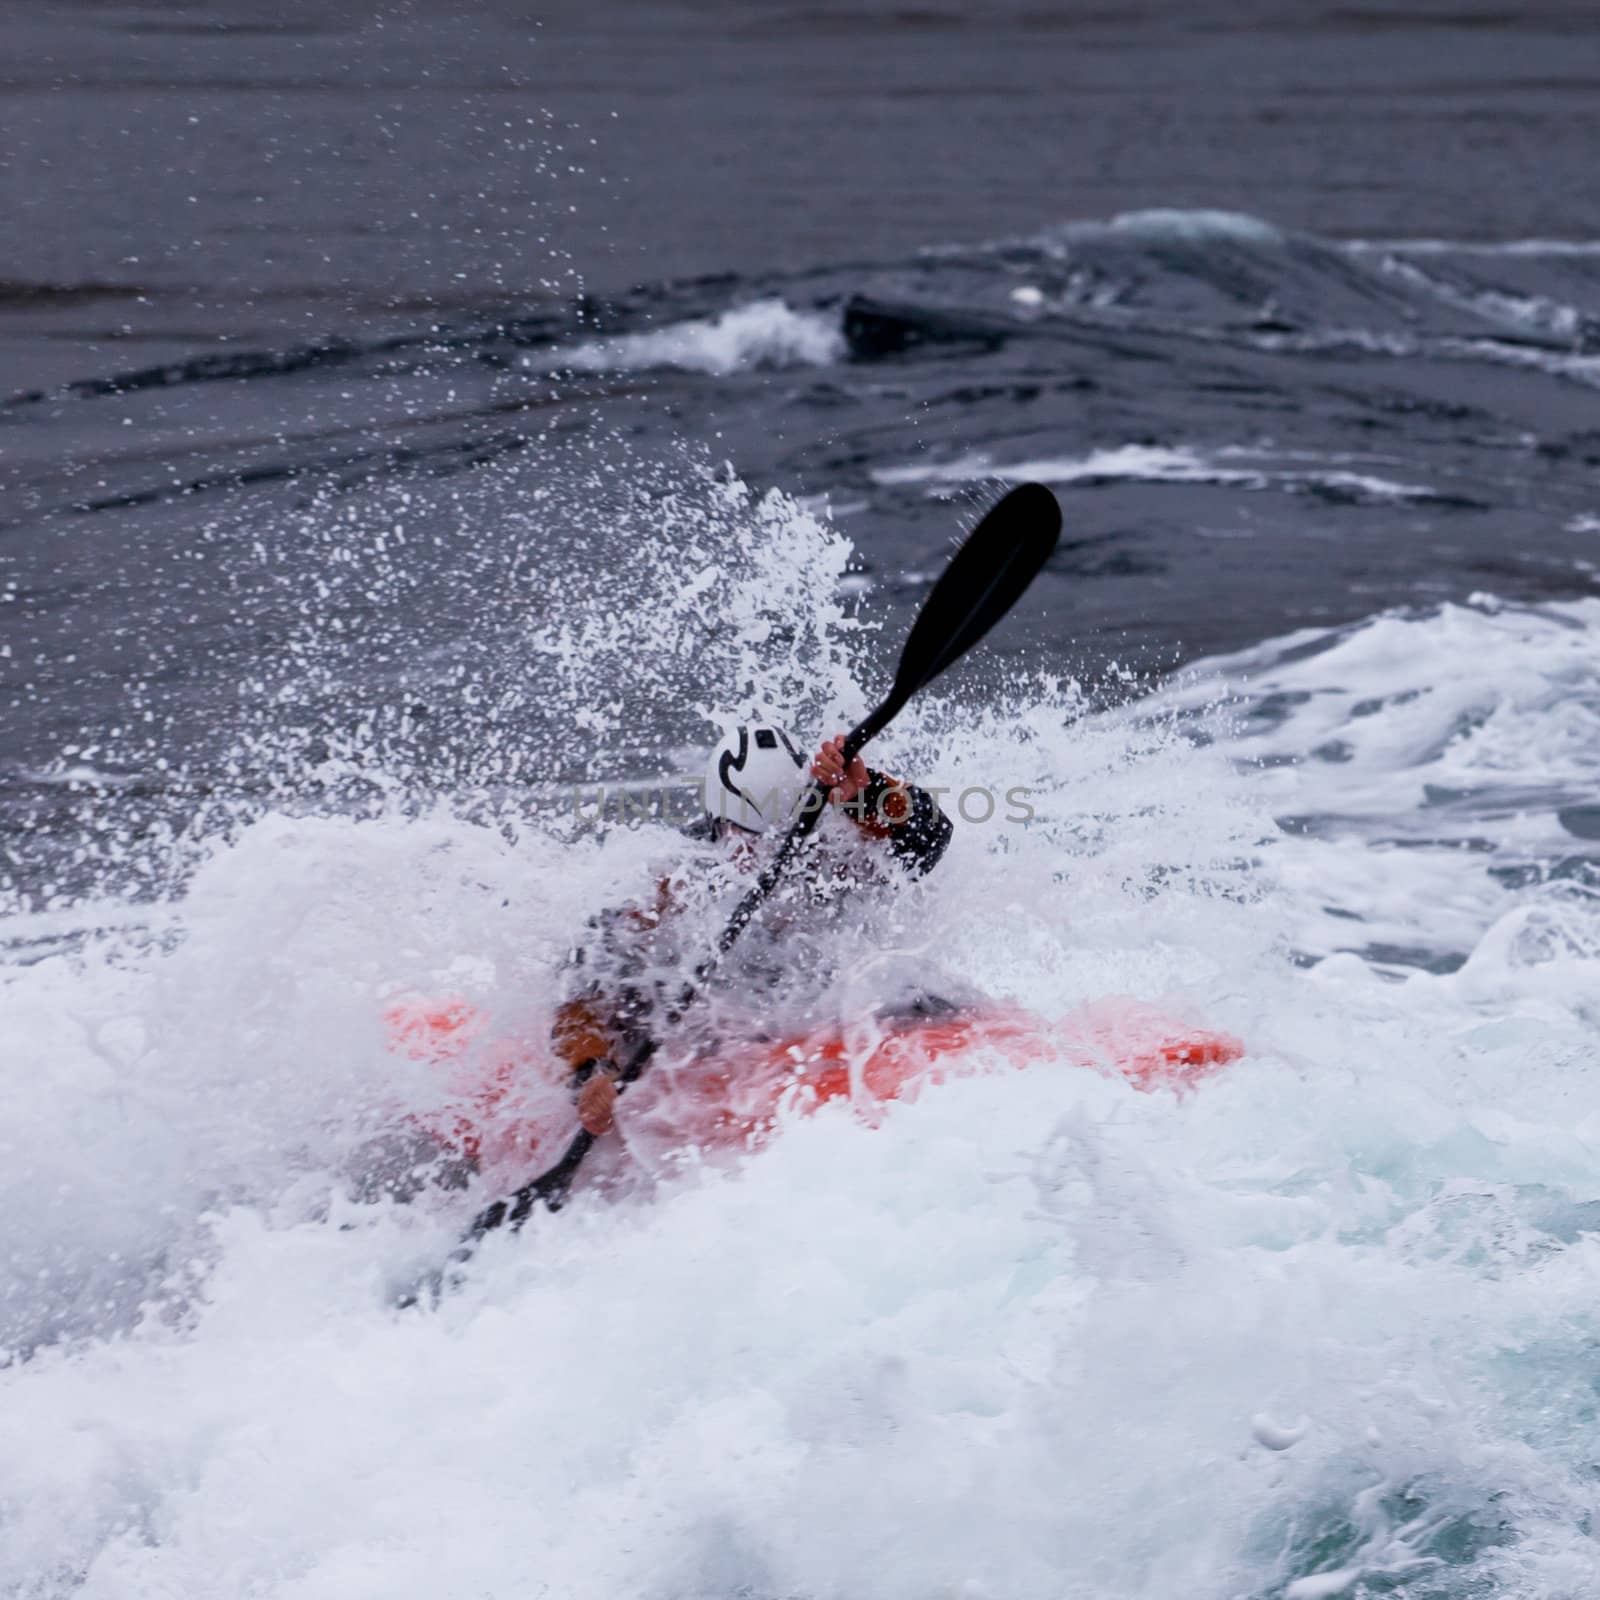 Kayaker mastering whitewater kayaking enjoying the extreme thrill of paddling fast currents breaking waves and wild water